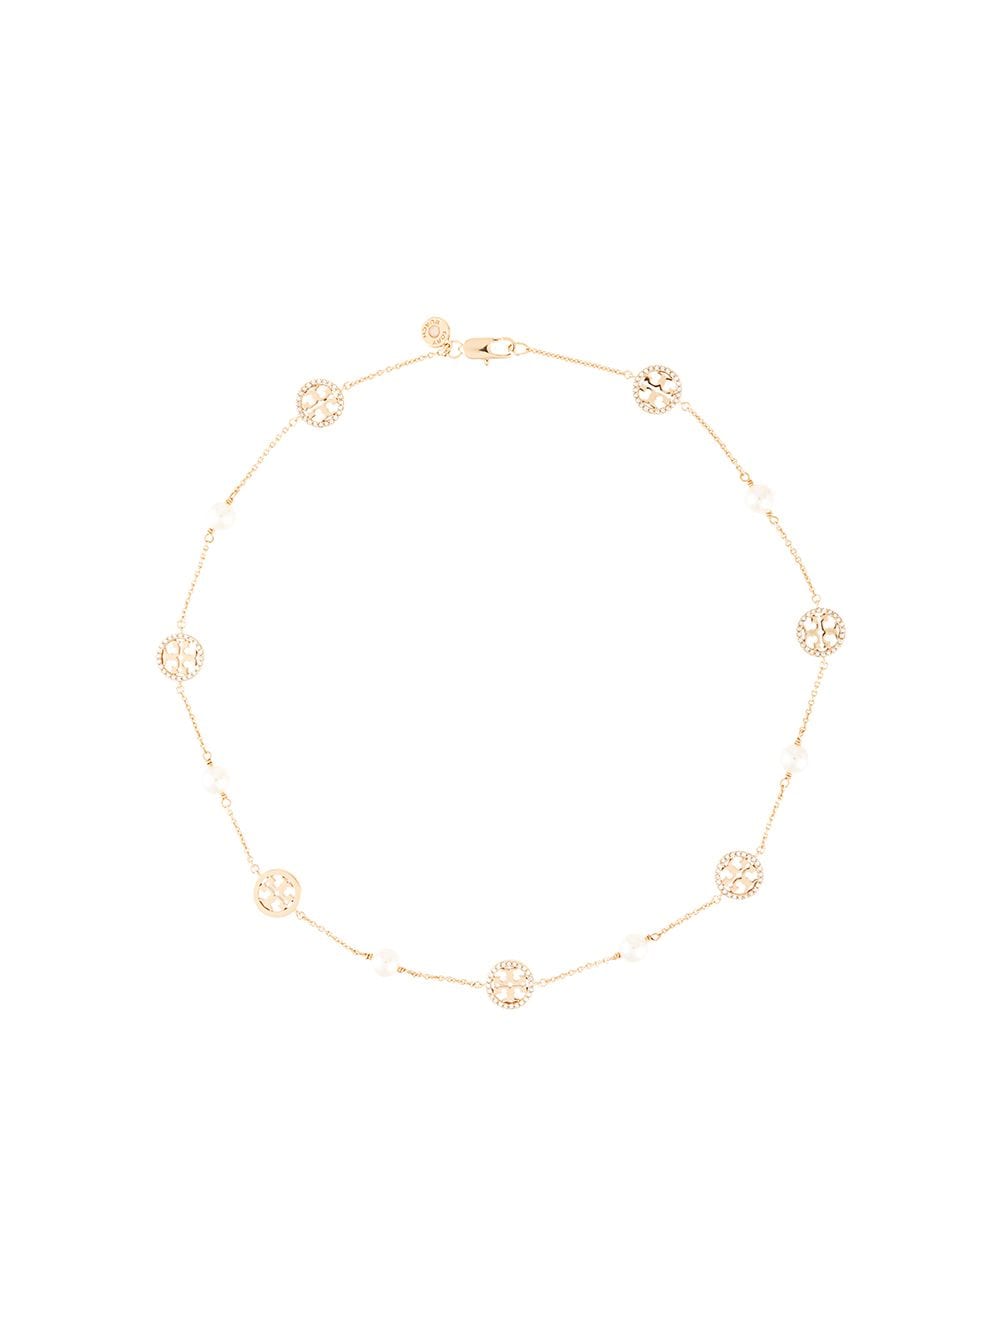 tory burch necklace